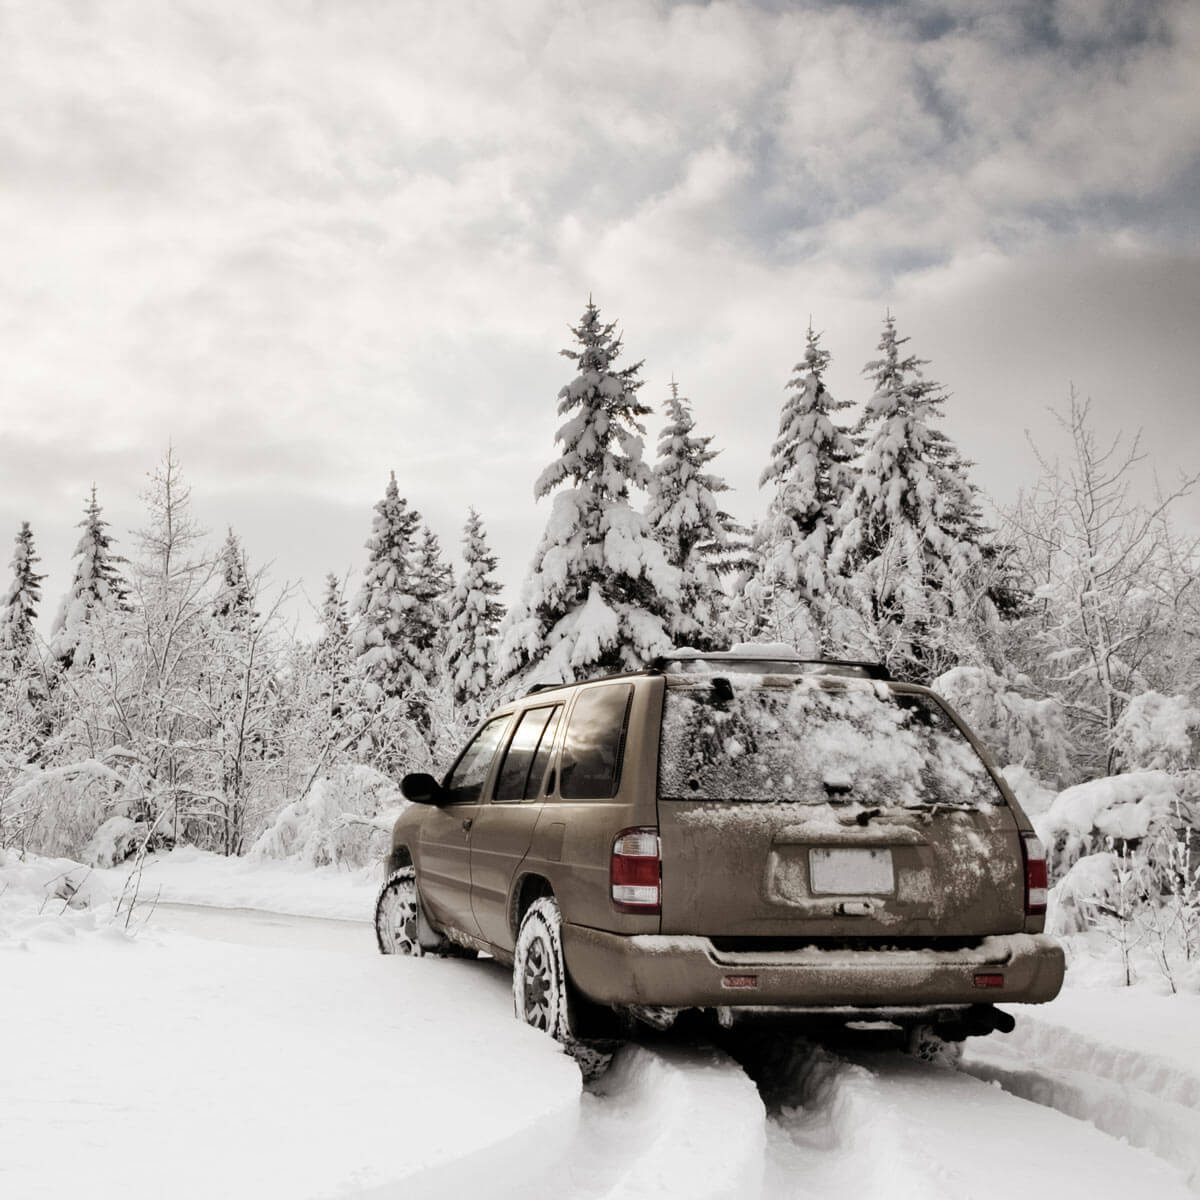 Tips For Preparing Your Car for Winter in the Adirondacks